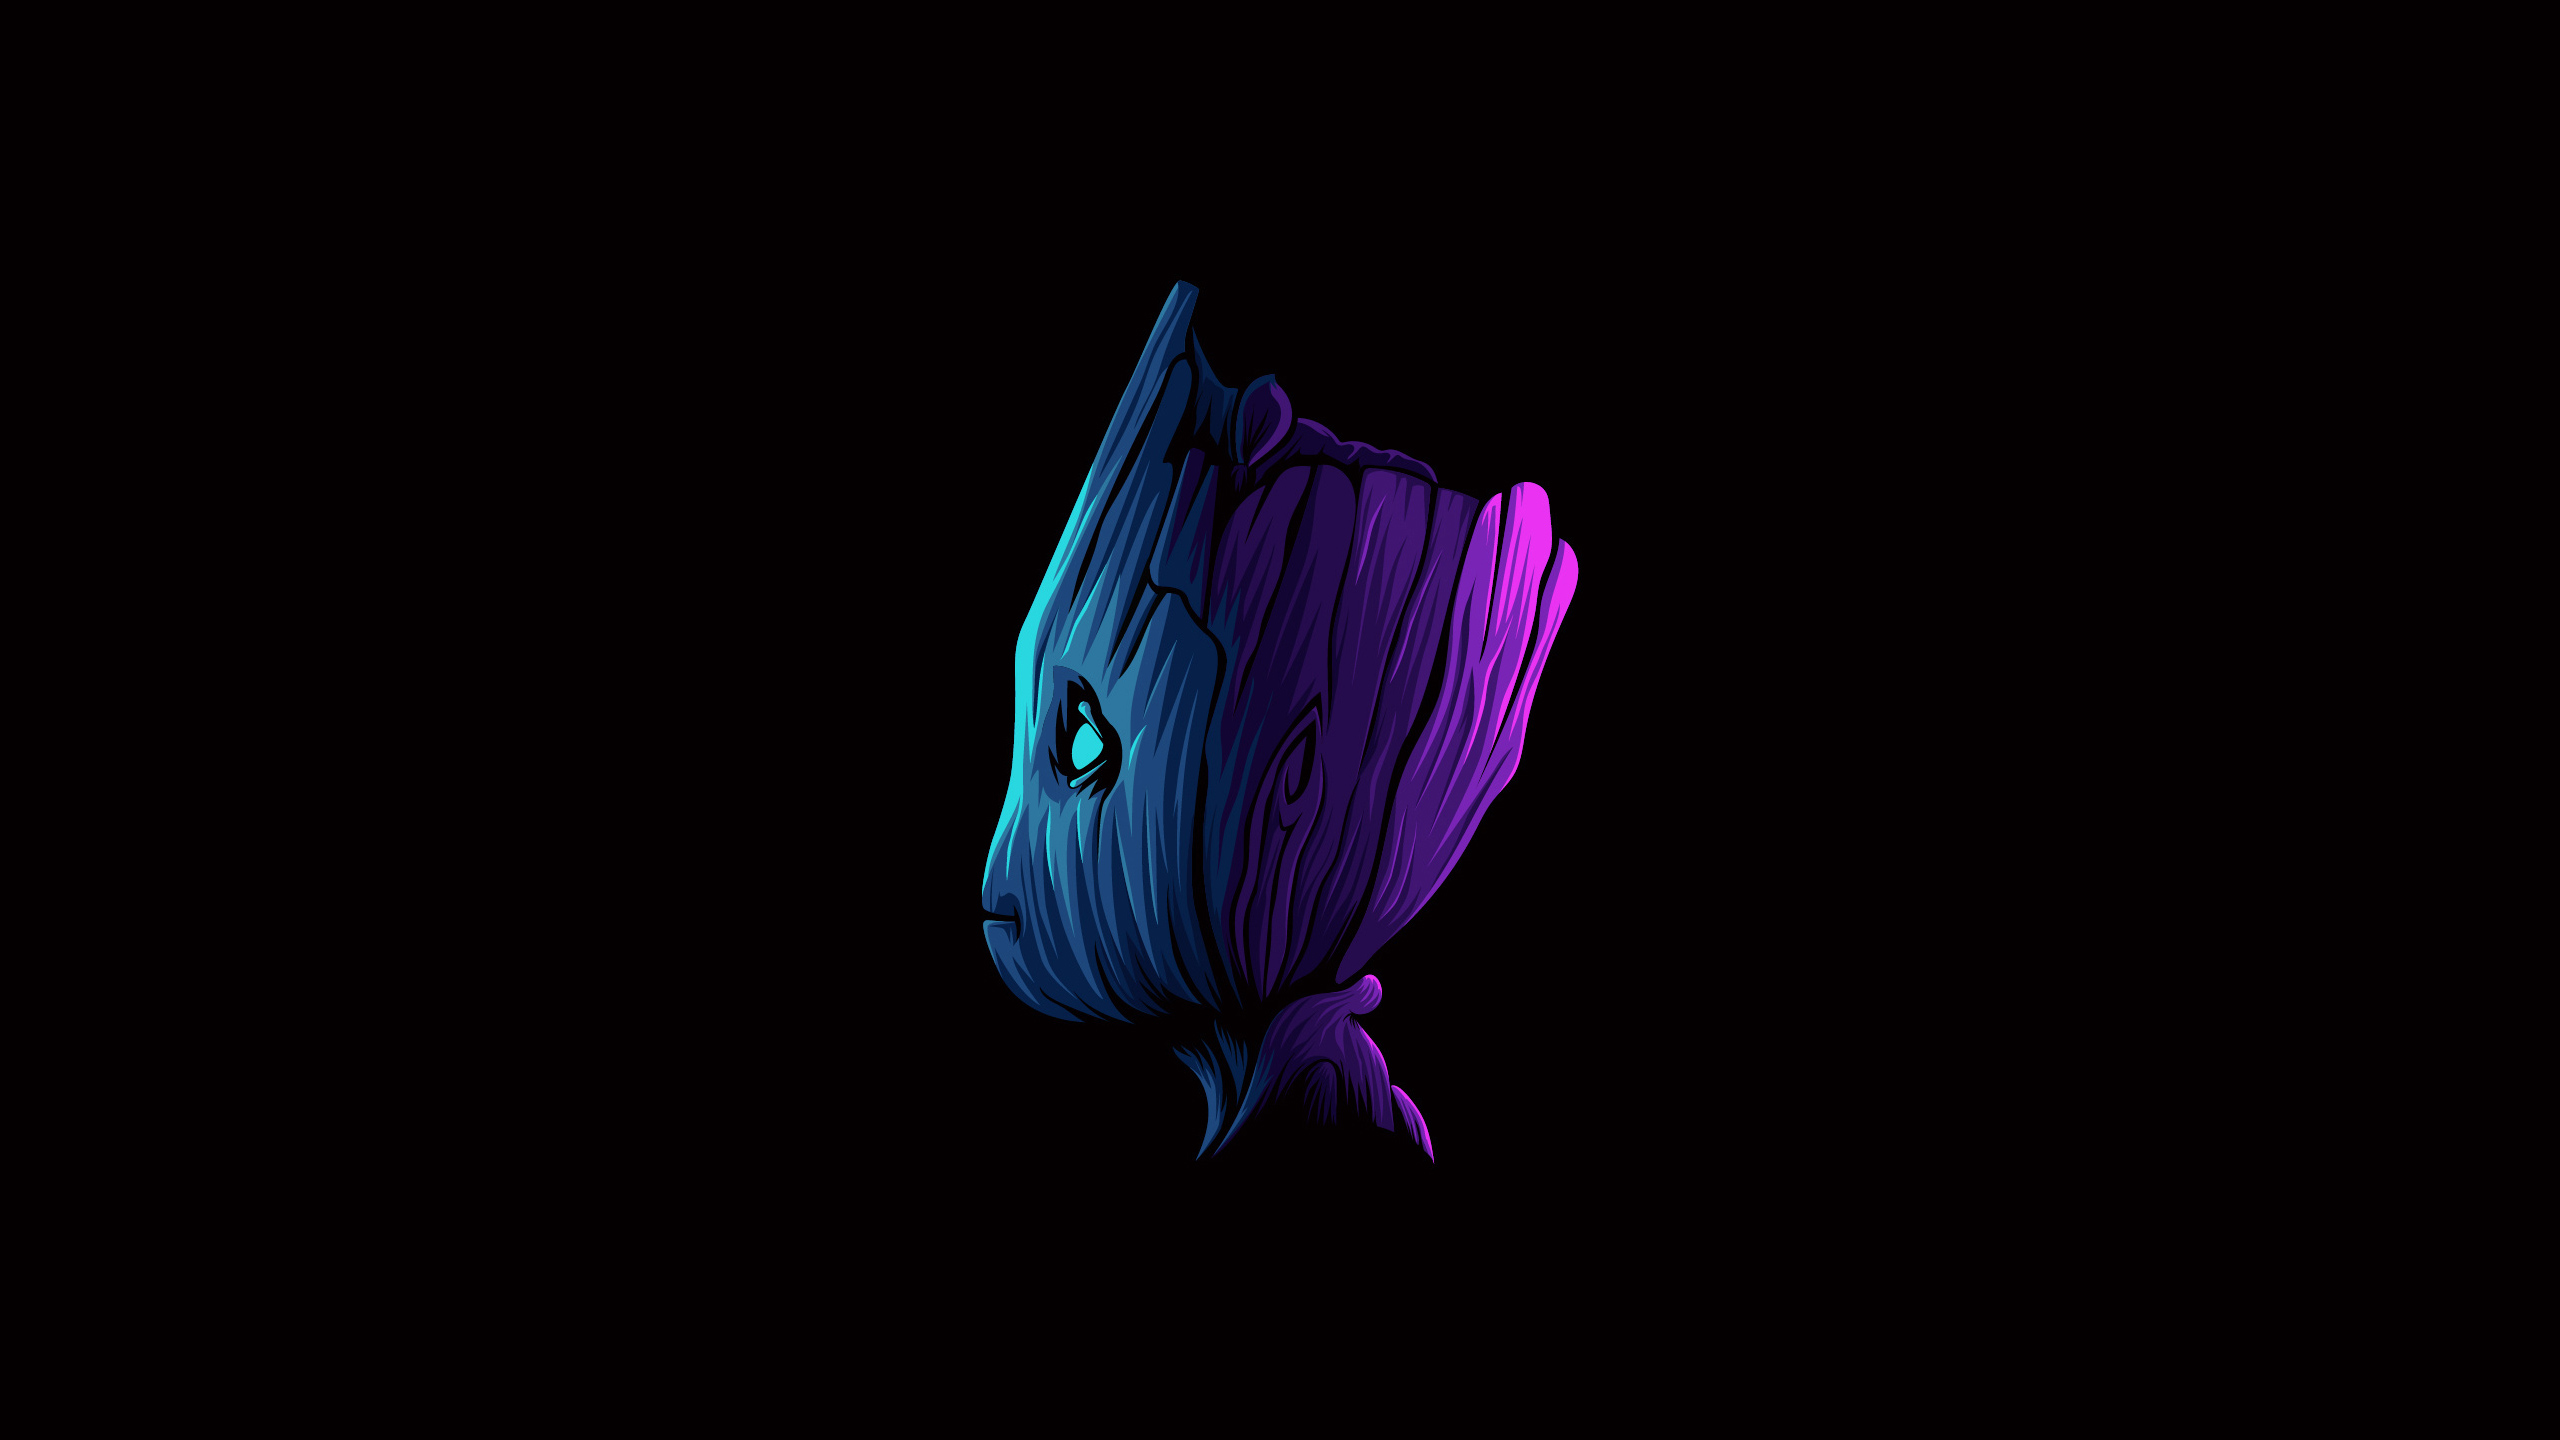 Groot HD Wallpaper by Vectto